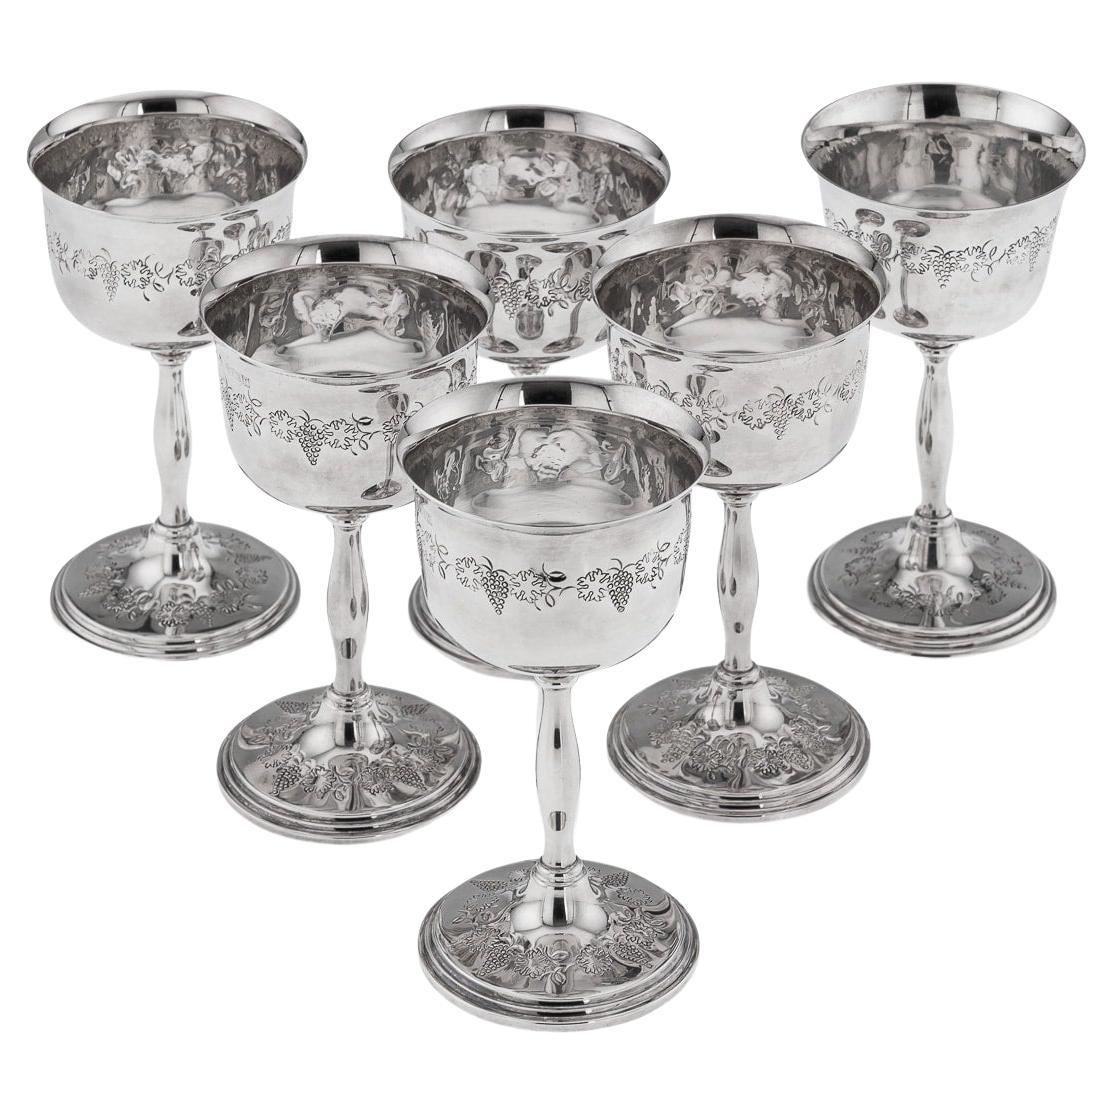 20th Century Set Of Six Solid Silver Wine Goblets By Cavalier, England c.1970s